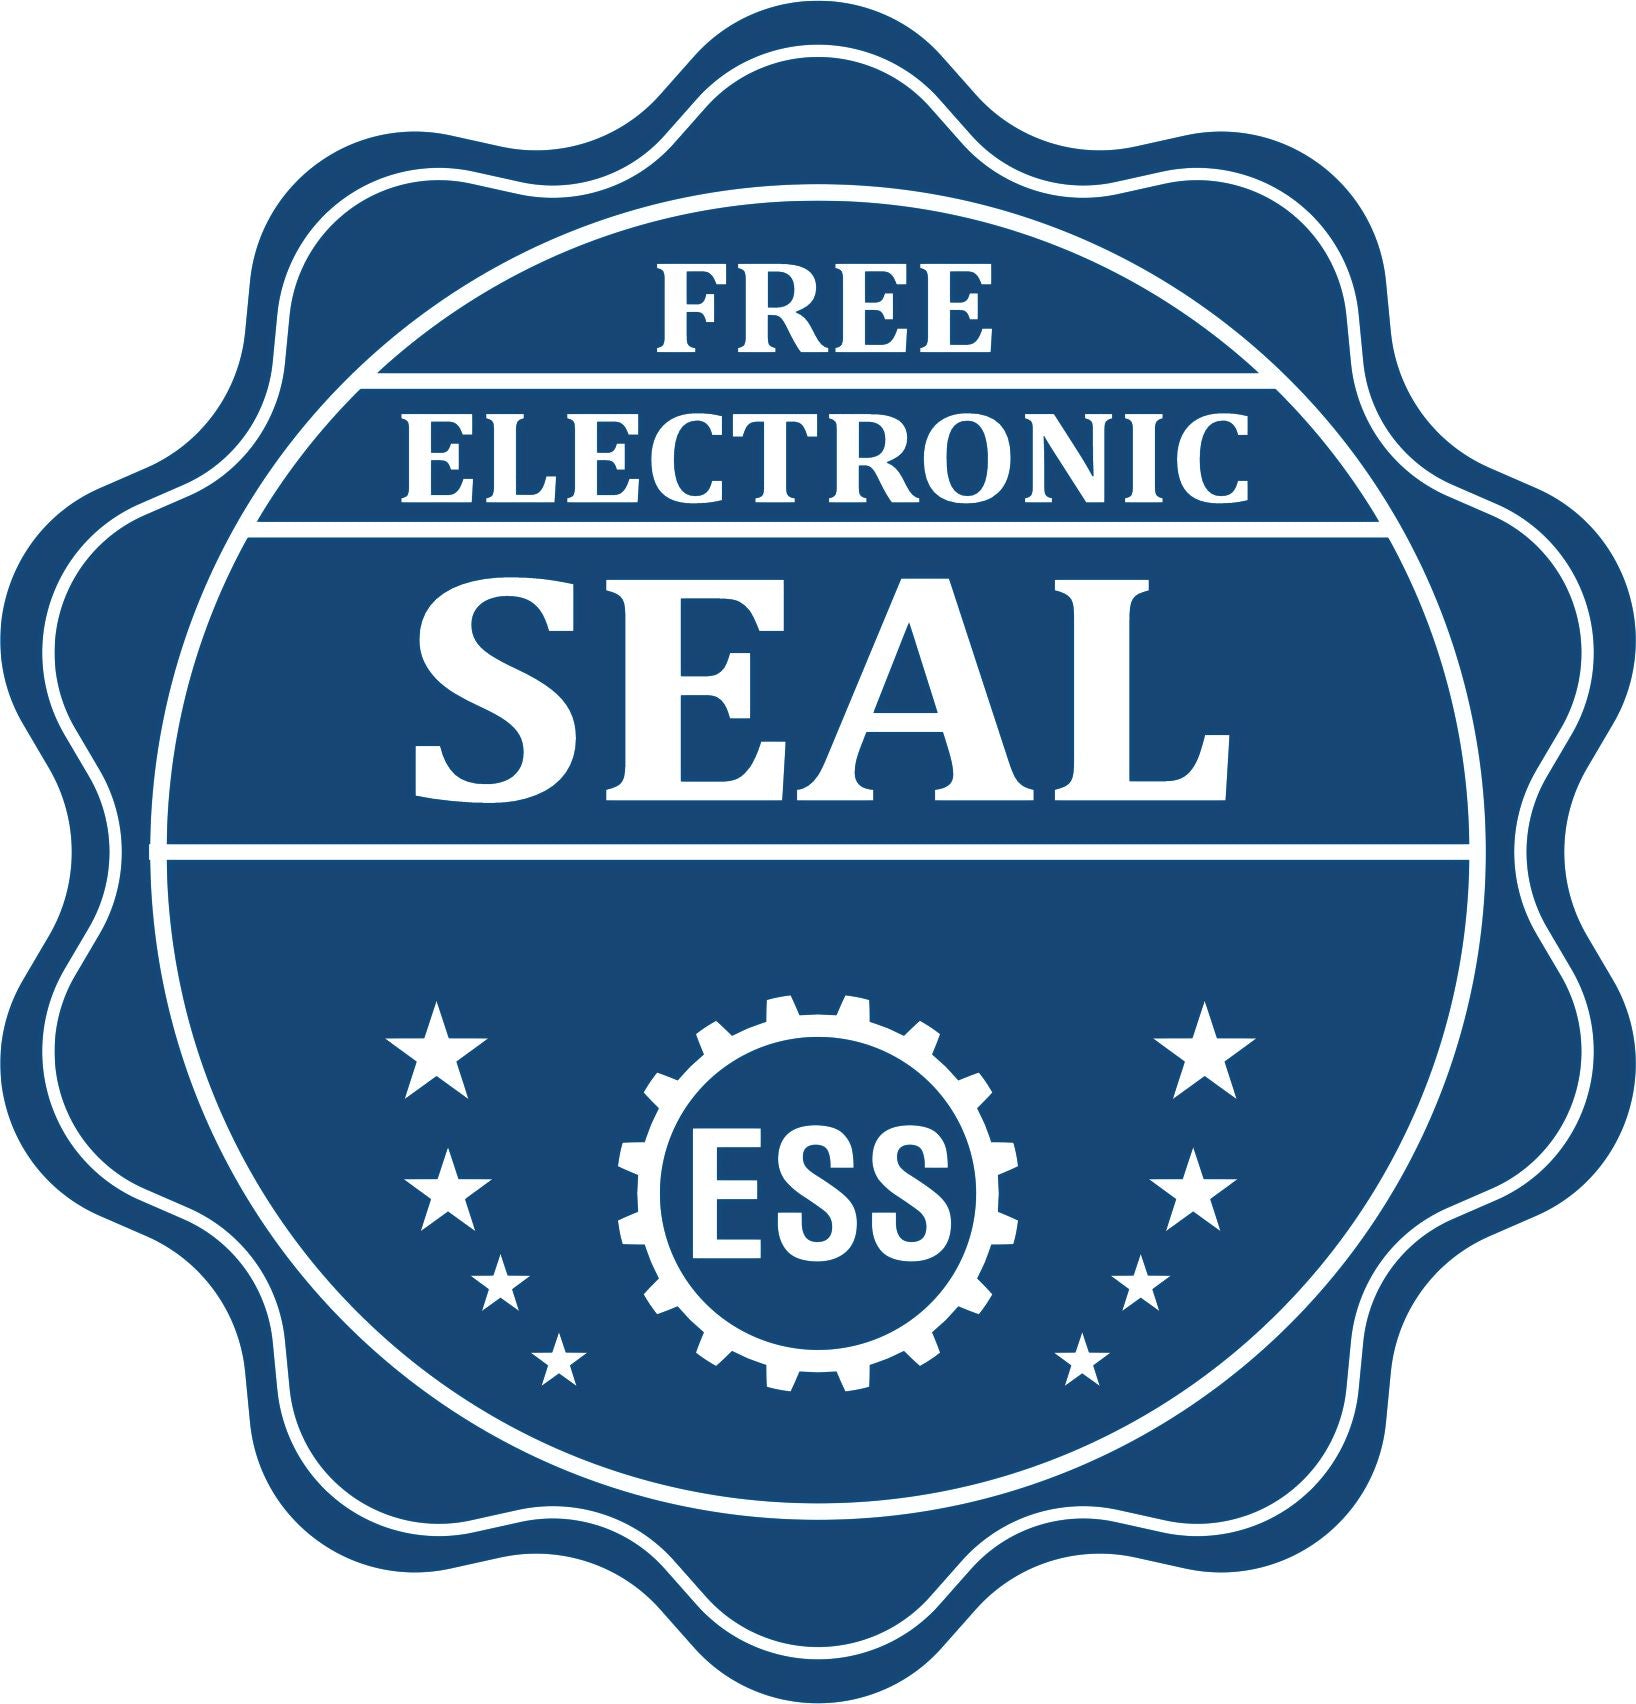 A badge showing a free electronic seal for the Slim Pre-Inked South Carolina Professional Geologist Seal Stamp with stars and the ESS gear on the emblem.